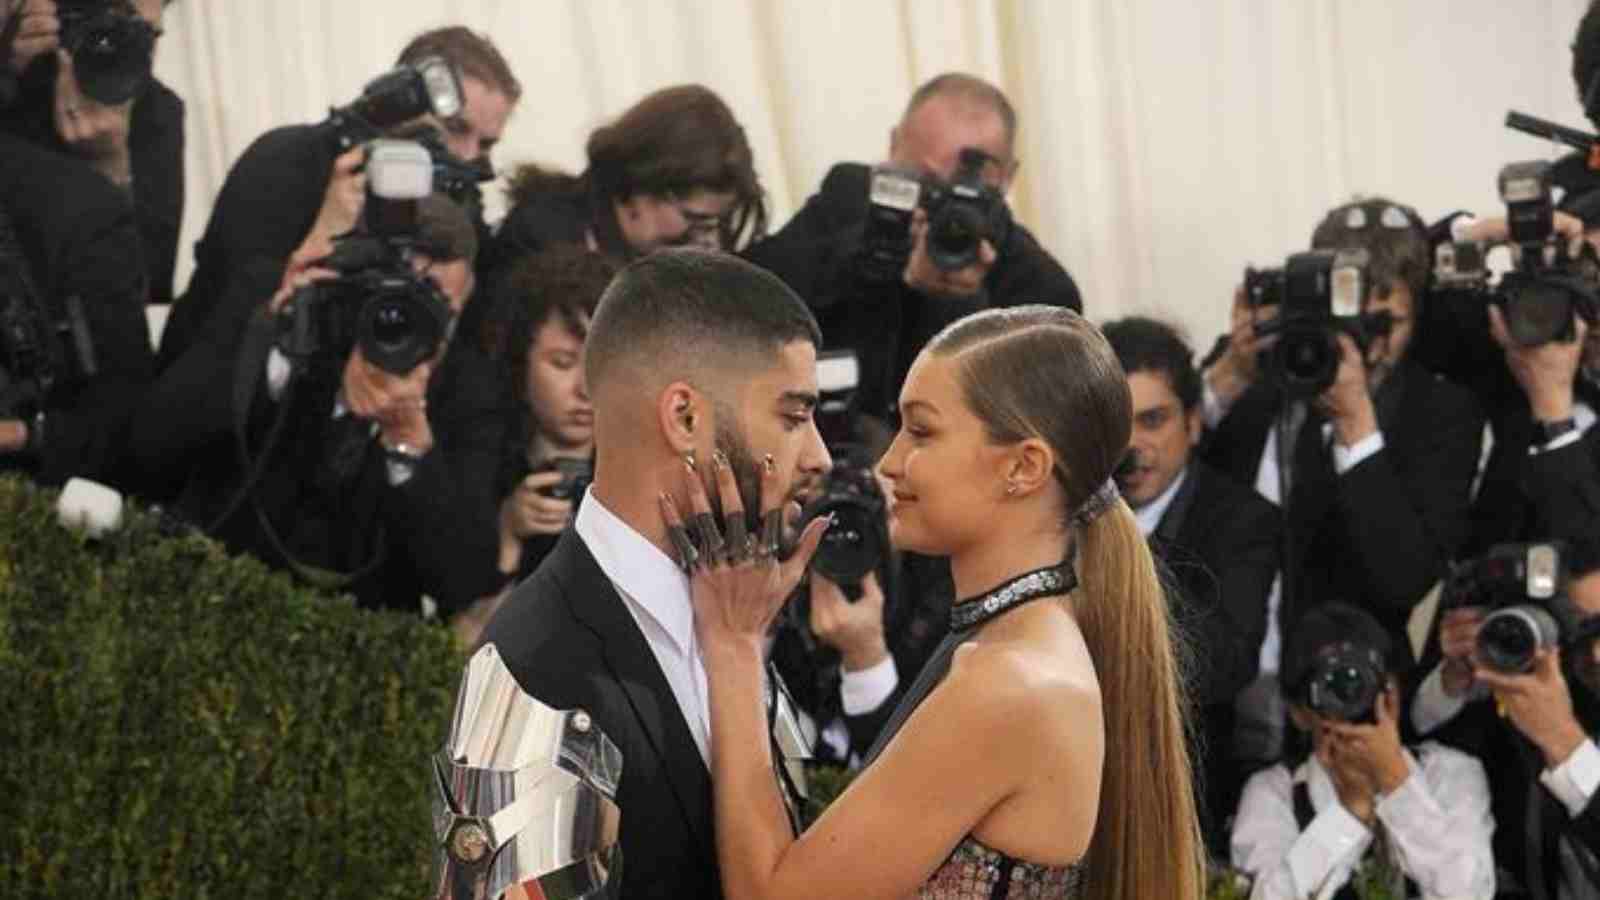 Who all other celebrities has Gigi Hadid dated apart from Zayn Malik?